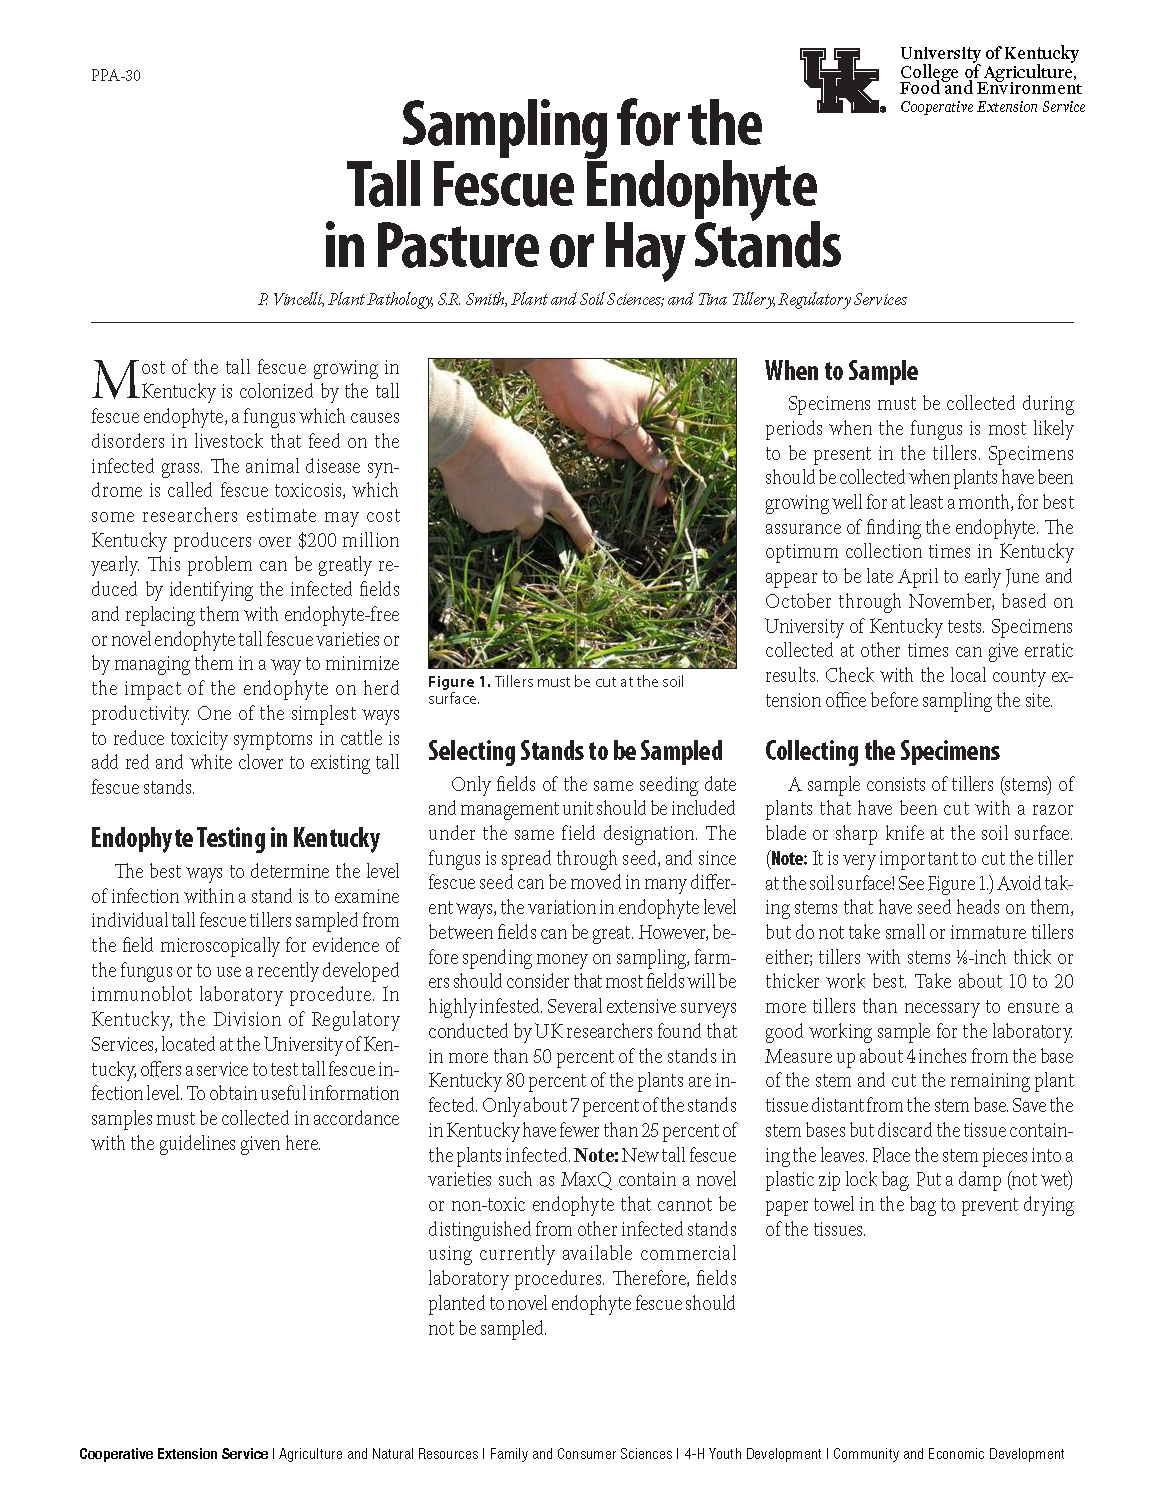 Sampling for Tall Fescue Endophyte in Pasture or Hay Stands publication page 1